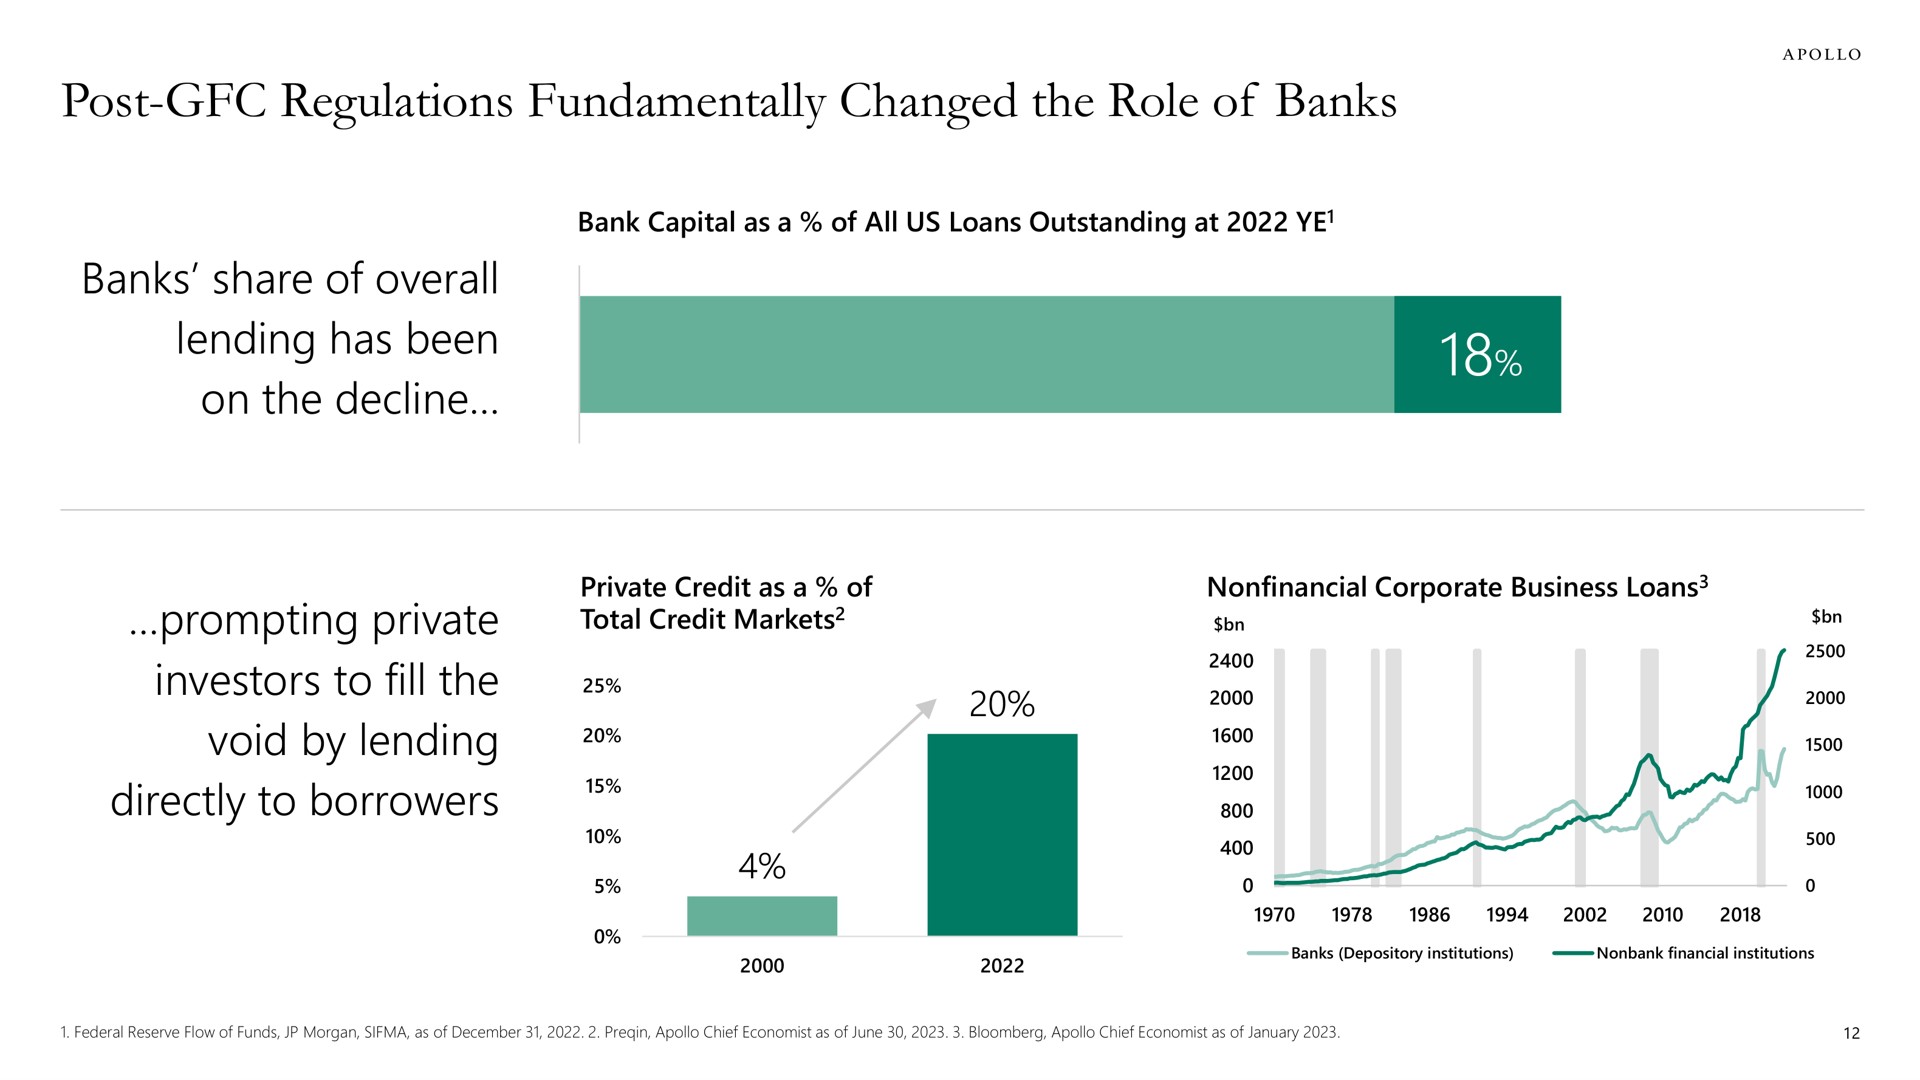 post regulations fundamentally changed the role of banks banks share of overall lending has been on the decline prompting private investors to fill the void by lending directly to borrowers a | Apollo Global Management